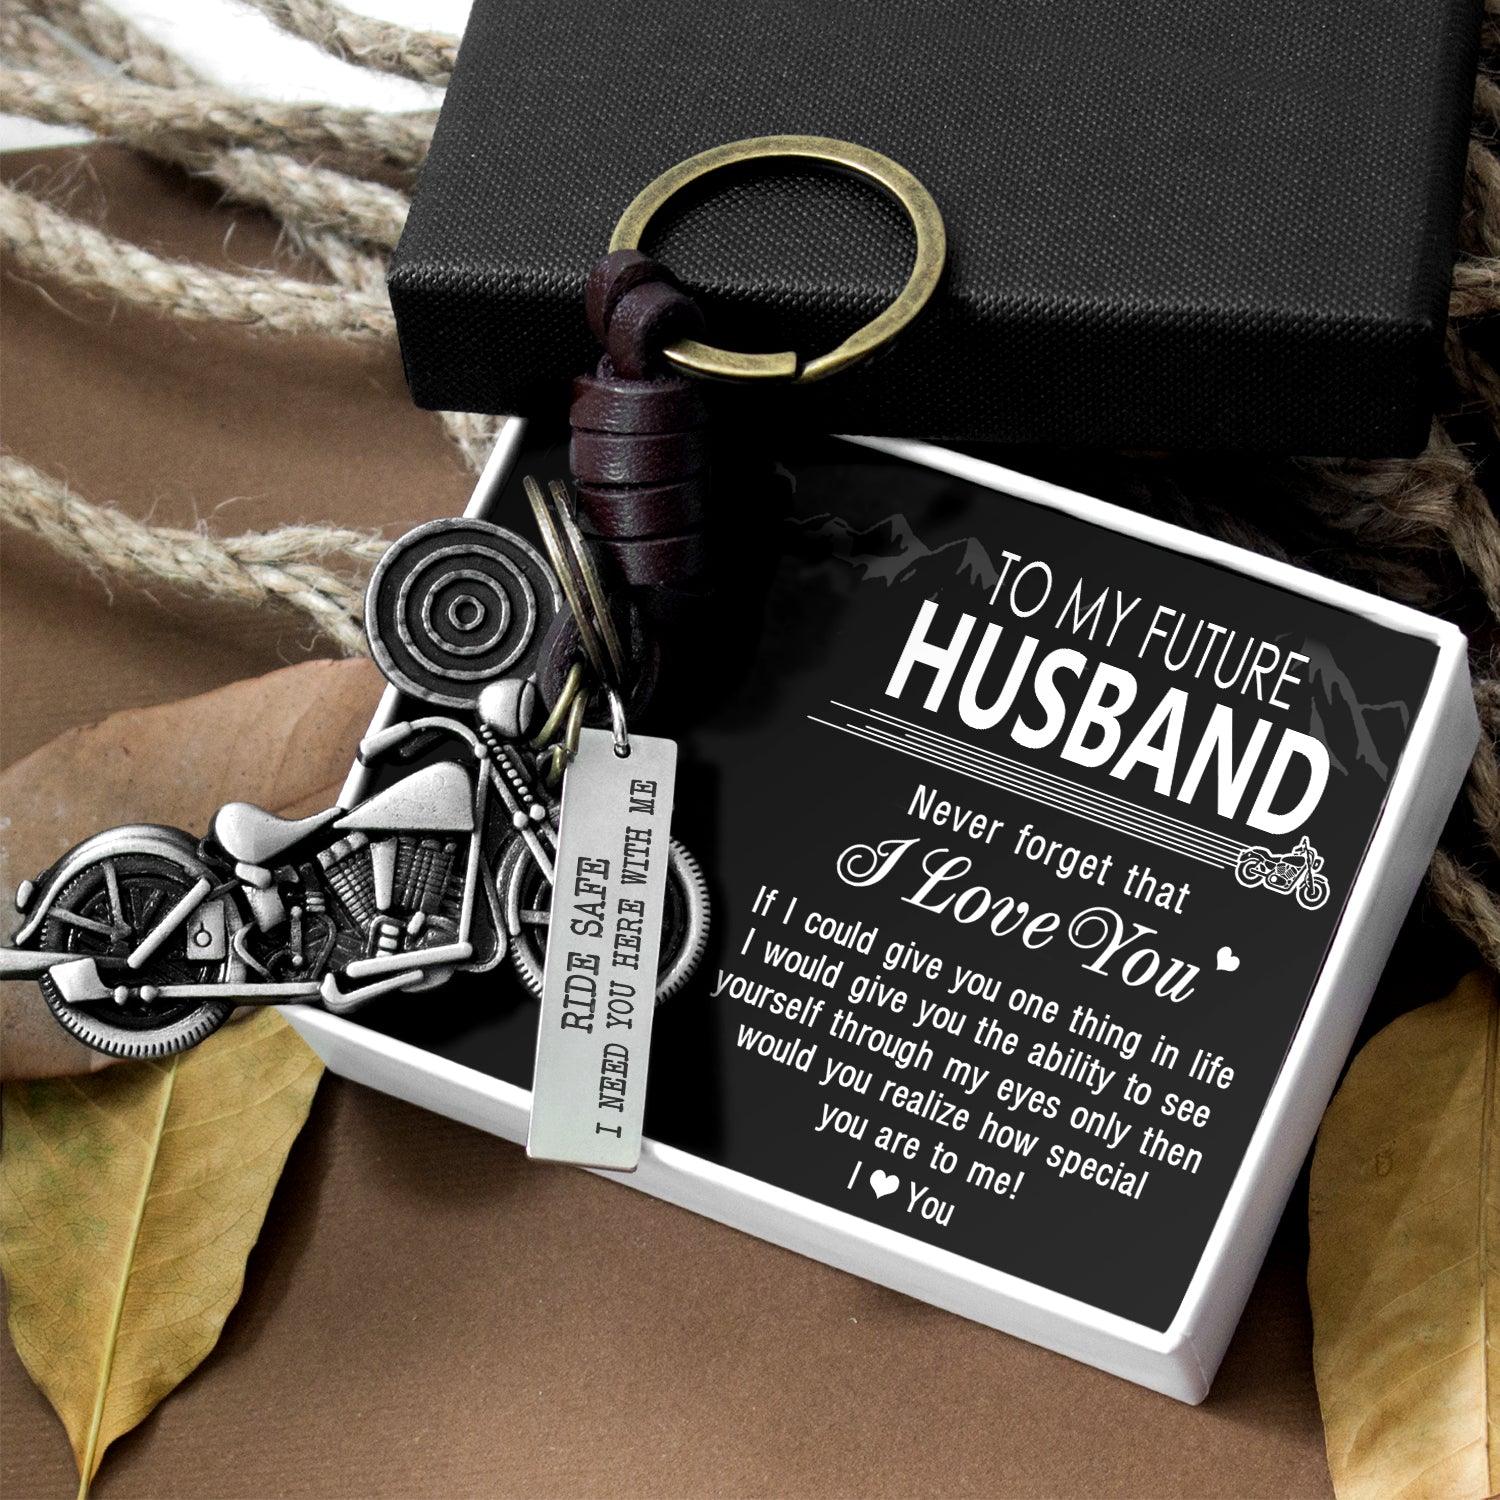 Motorcycle Keychain - To My Future Husband - Ride Safe I Need You Here With Me - Augkx24001 - Gifts Holder